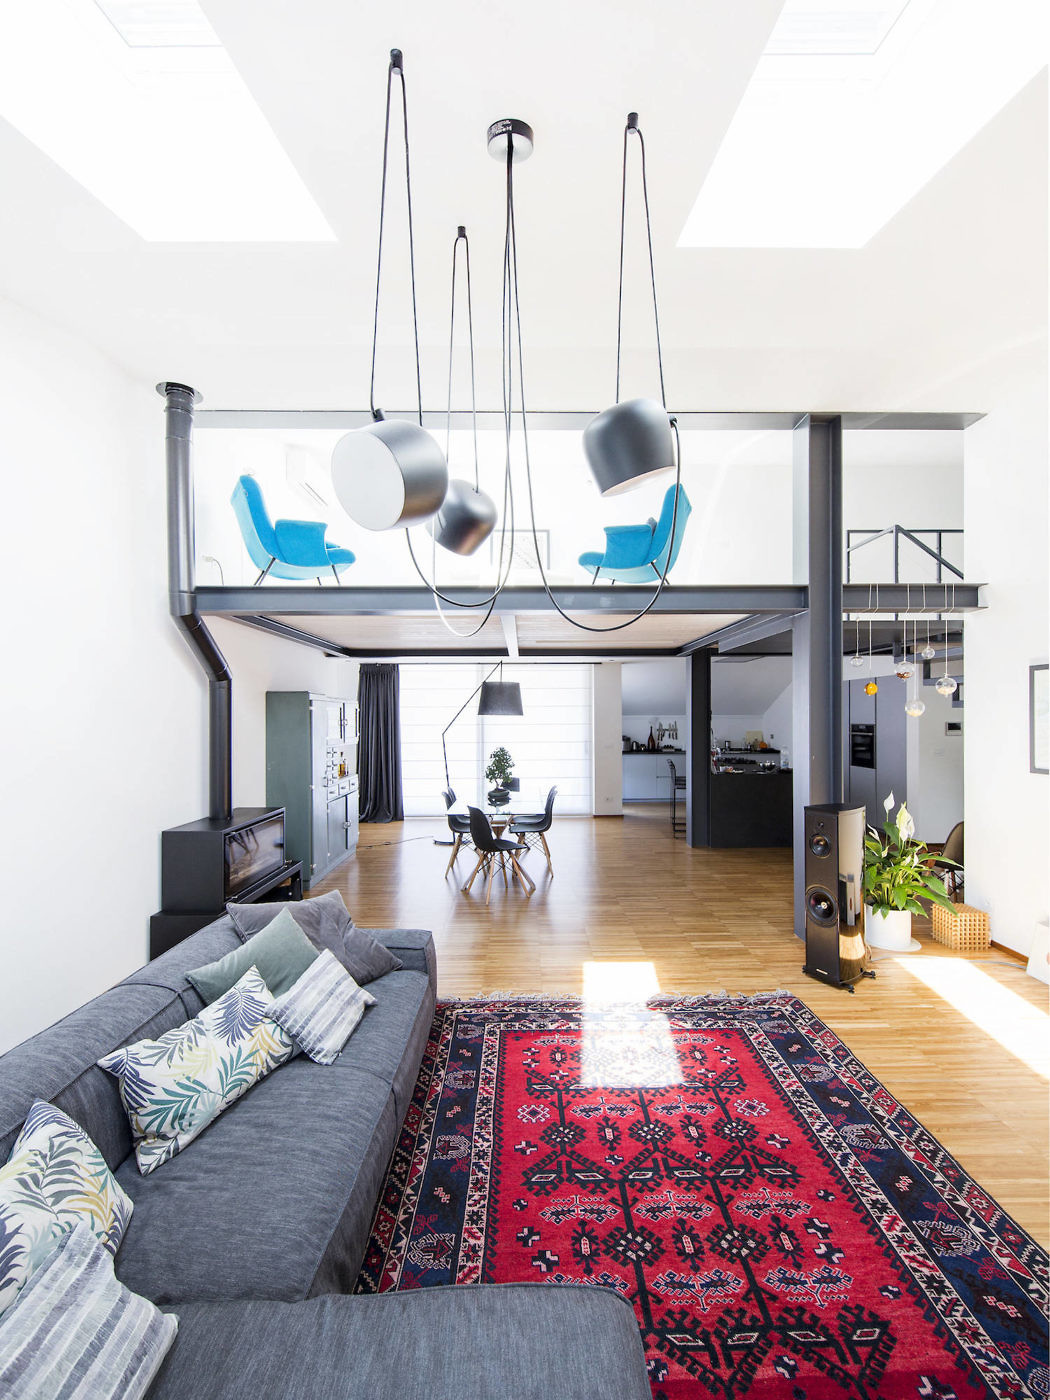 Modern living room with a loft, hanging chairs, sectional sofa, and red pattern